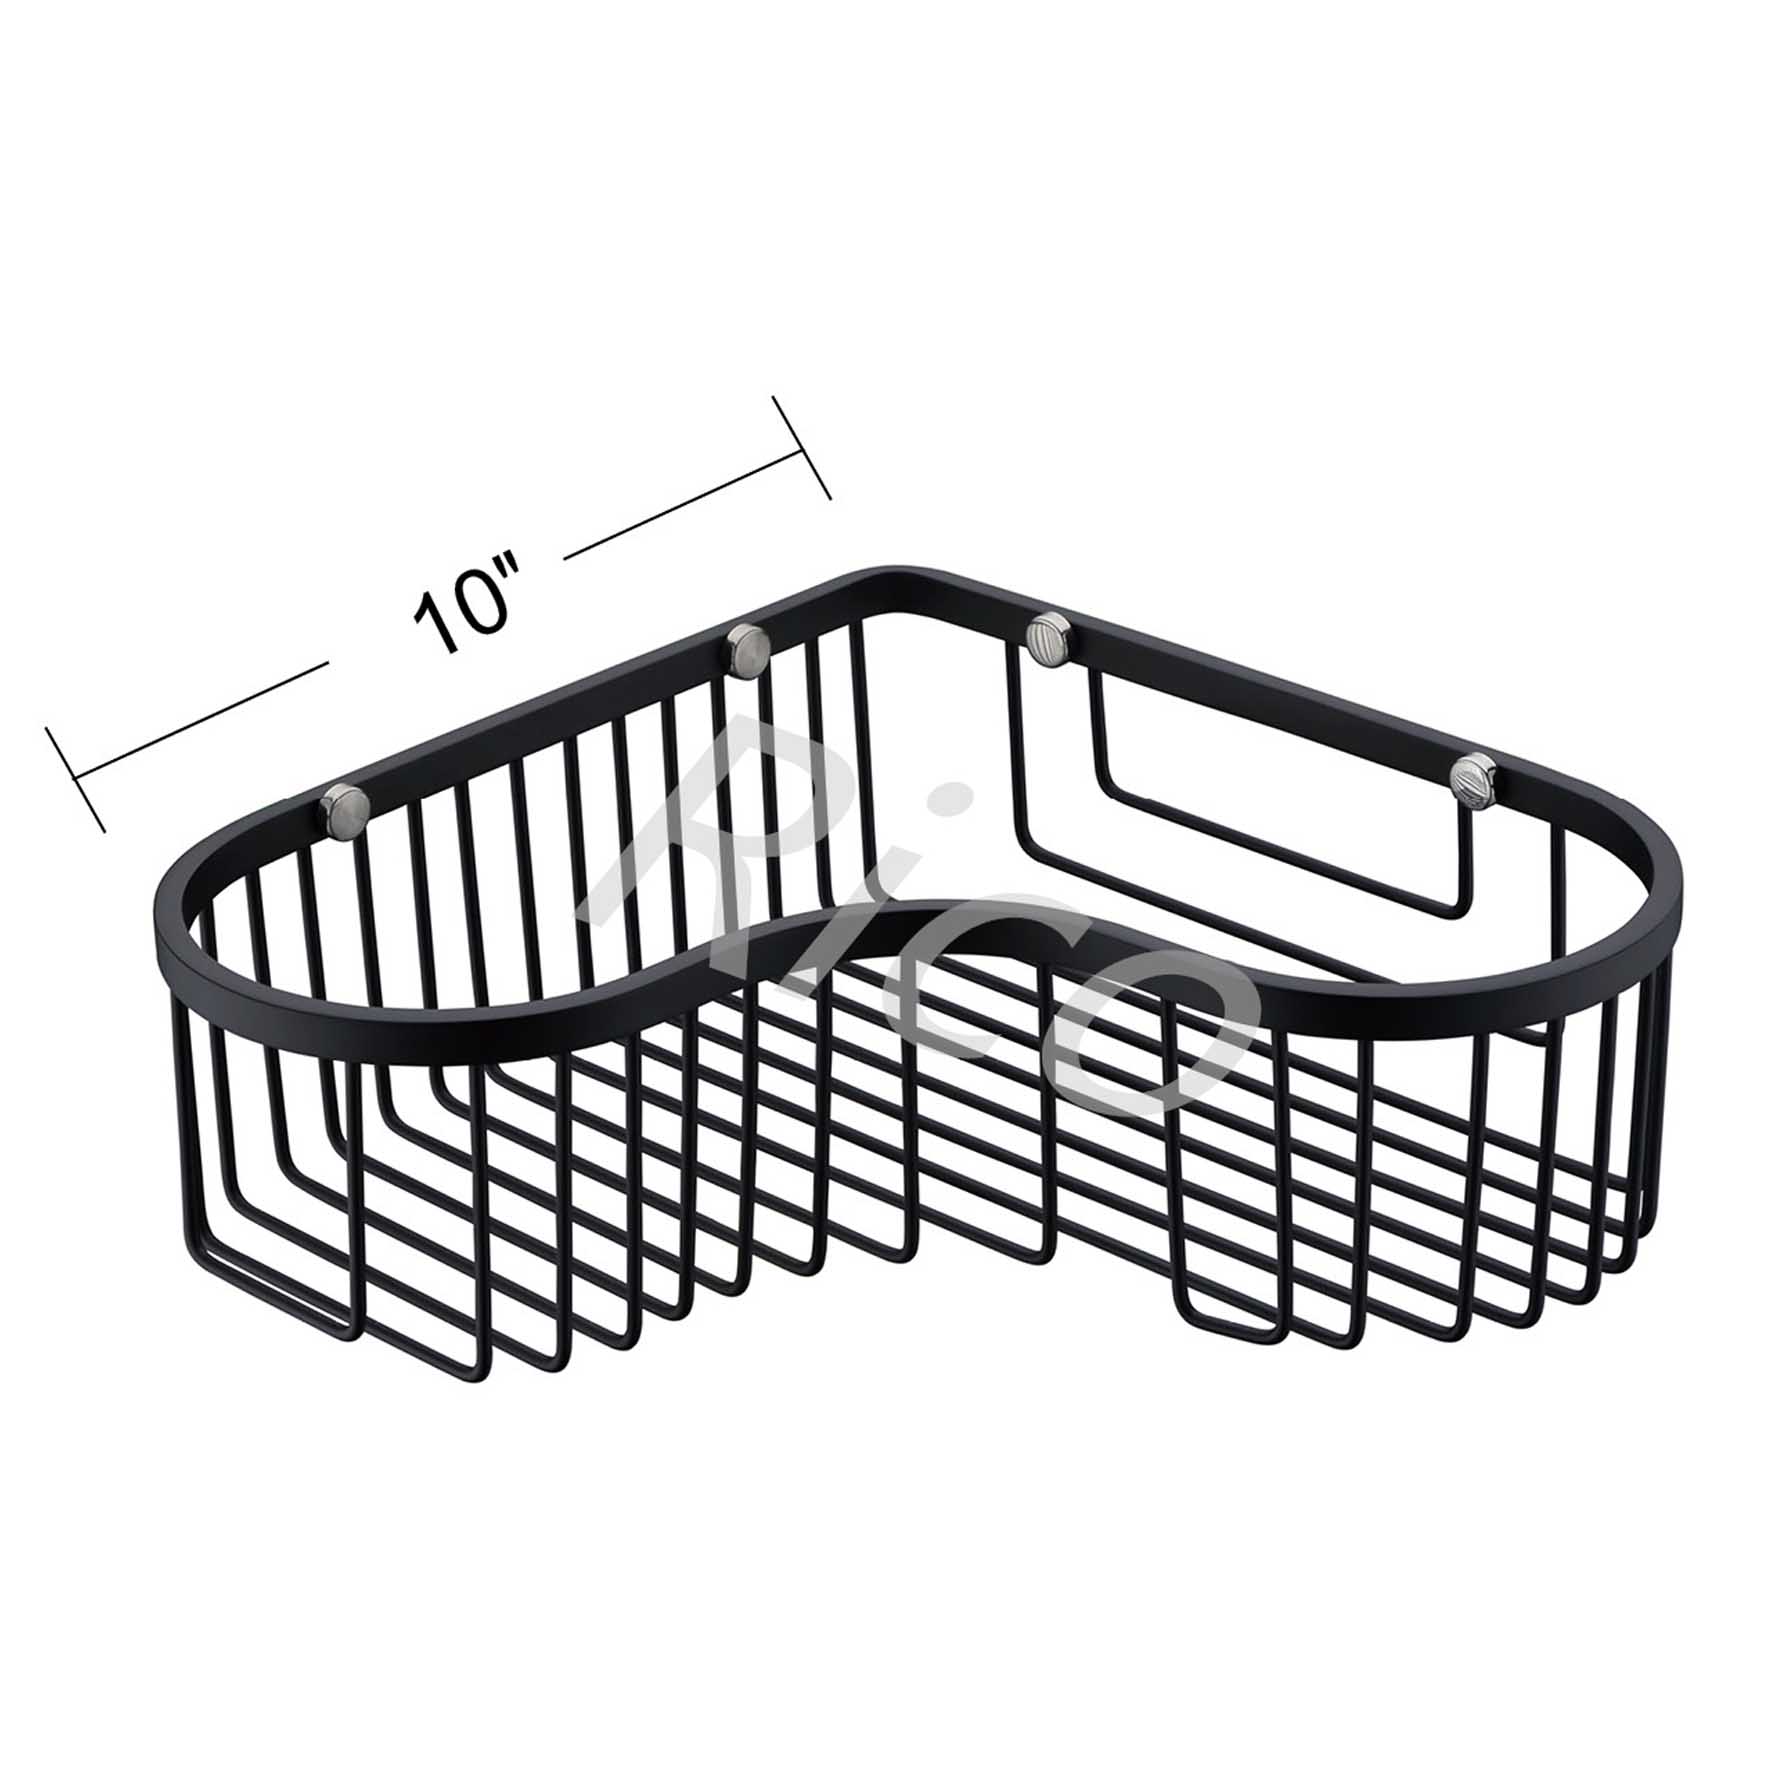 Rico : Stainless Steel Soap Basket – RICO-R11802